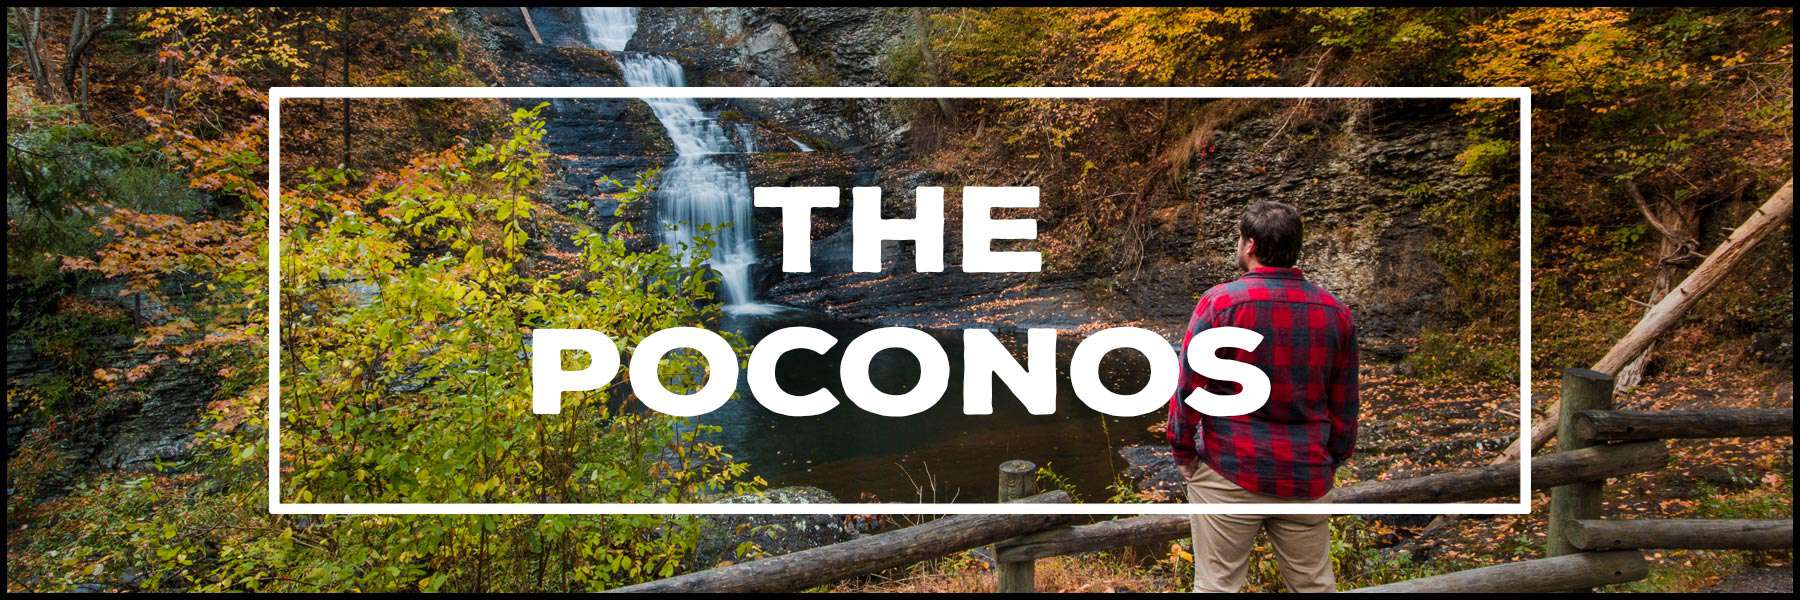 The best things to do in the Poconos of Pennsylvania